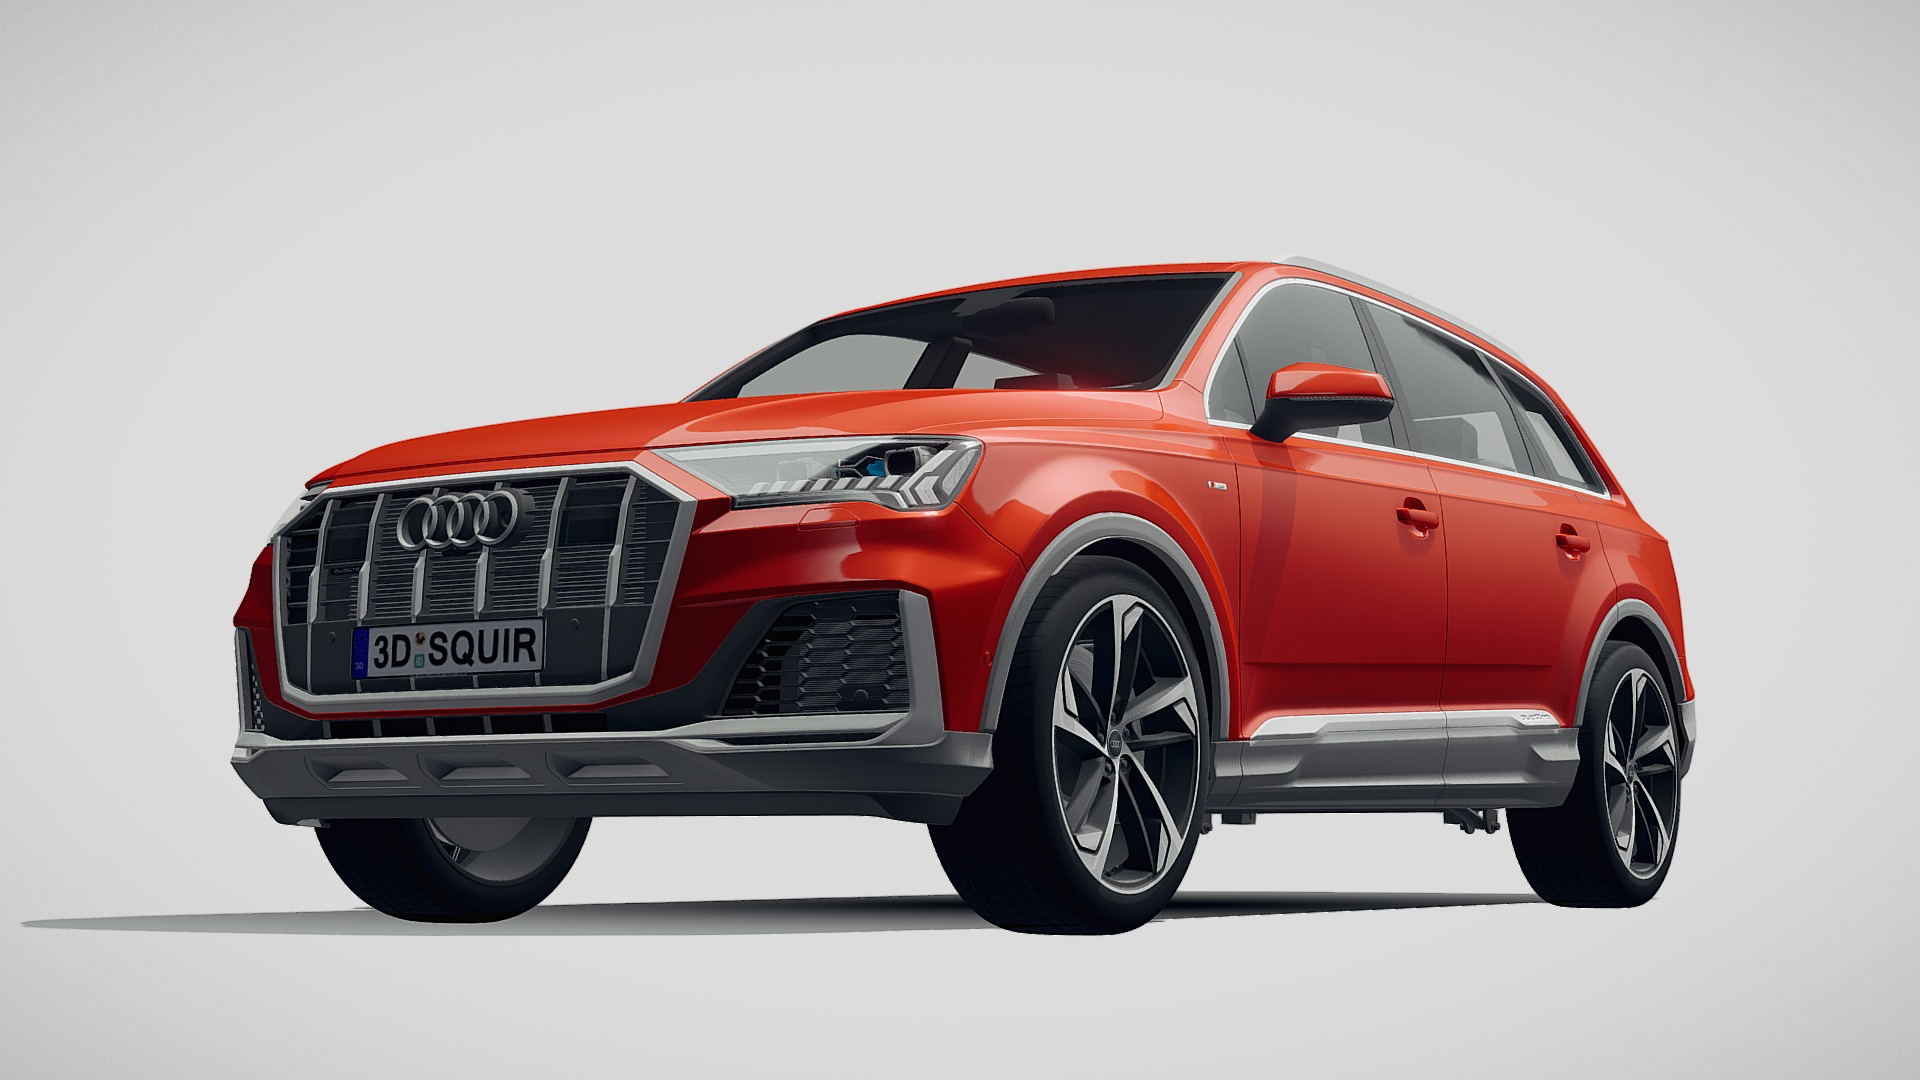 3D model Audi Q7 2020 - This is a 3D model of the Audi Q7 2020. The 3D model is about a red sports car.